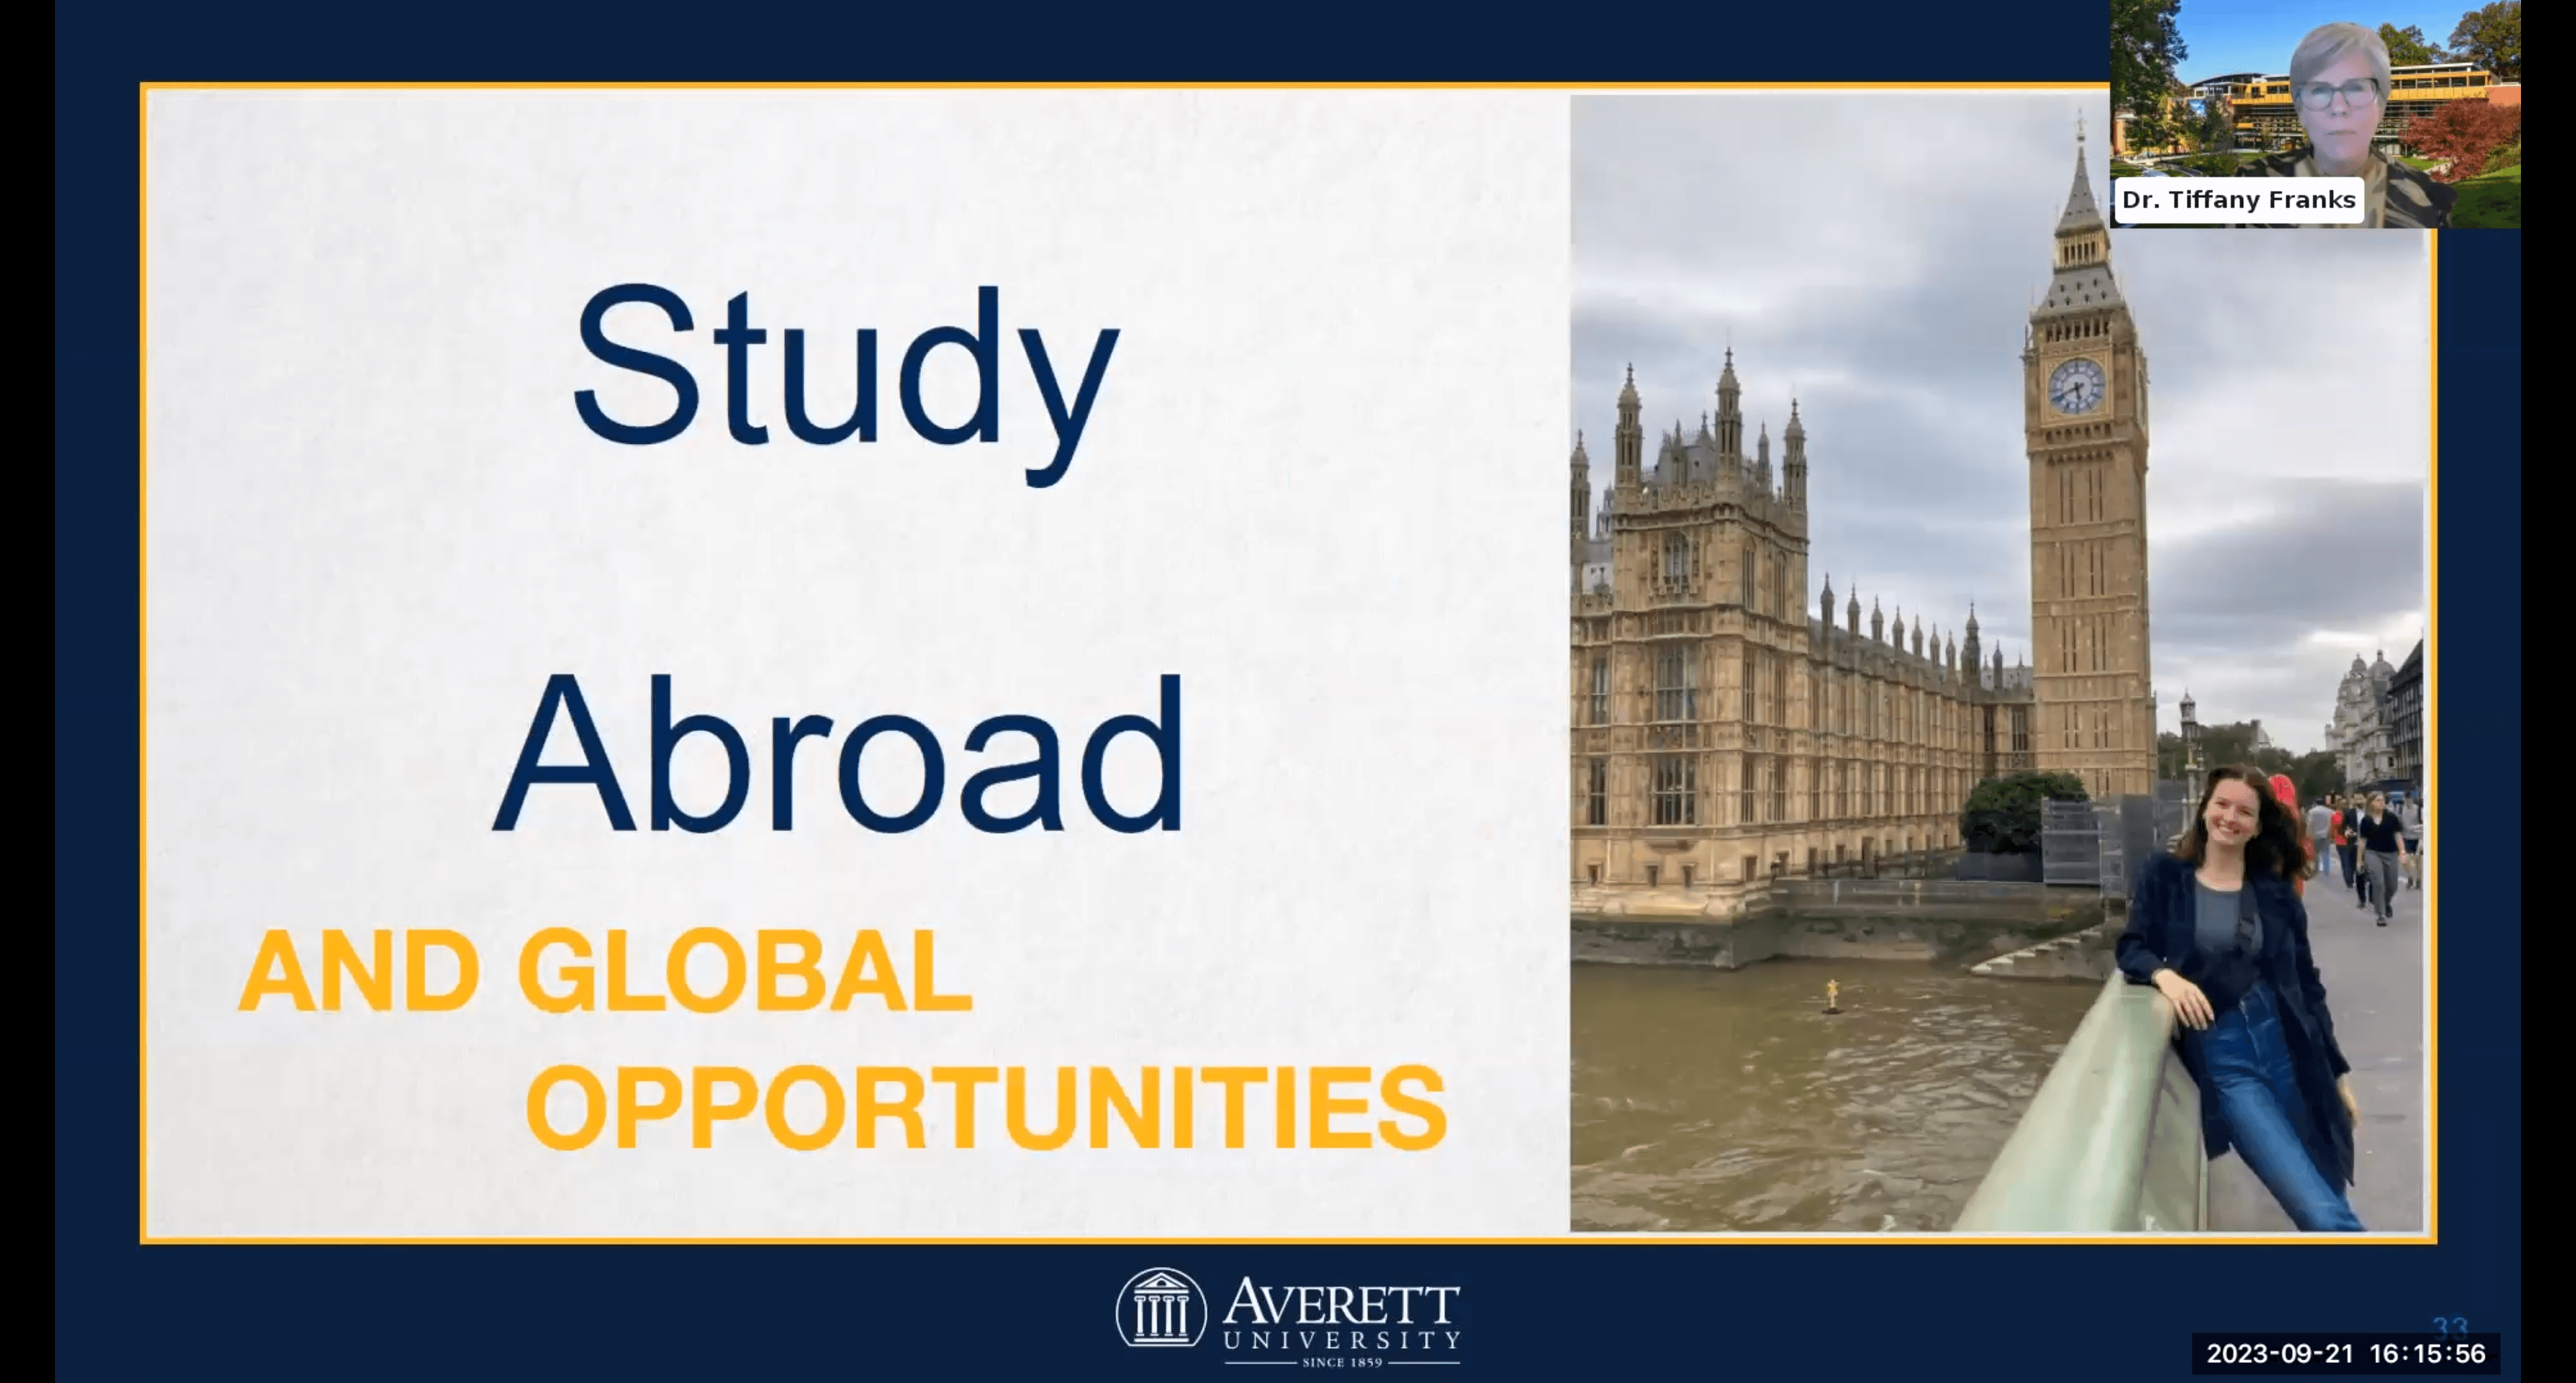 Study abroad is essential for students to succeed in a globalized world.